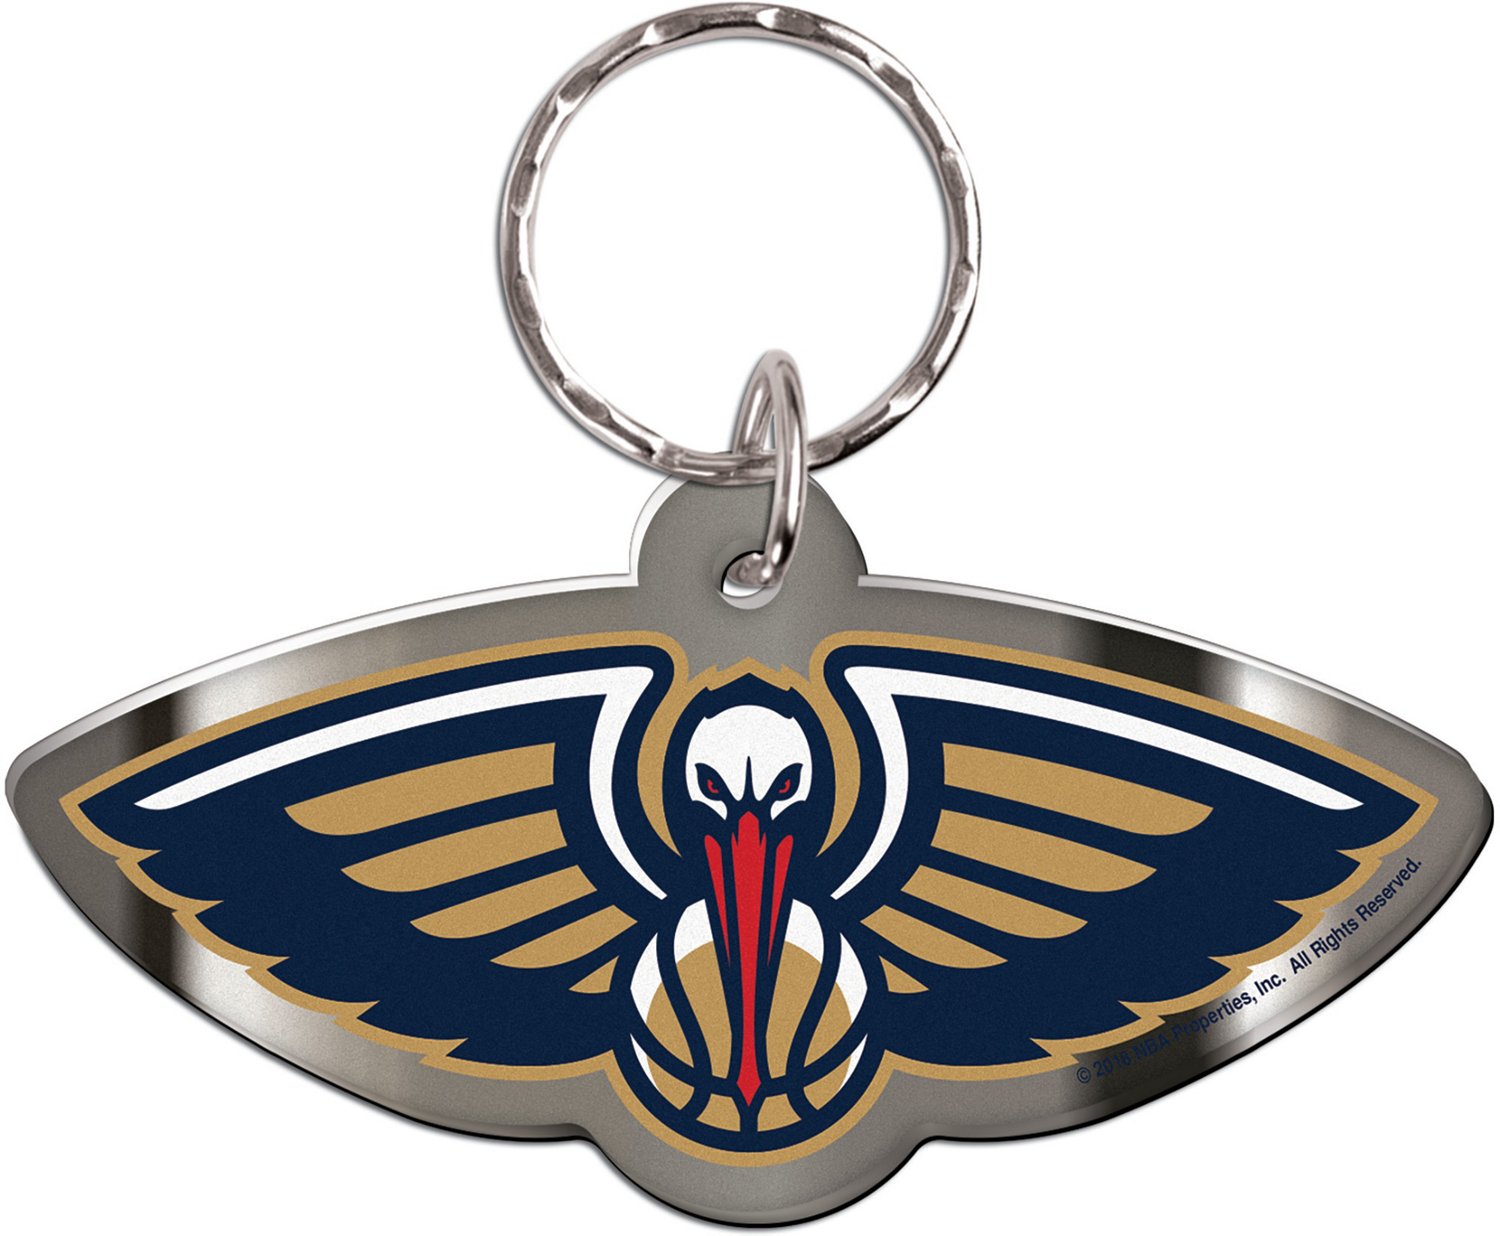 New Orleans Pelicans Keychains, Pelicans Collection, New Orleans Pelicans  Keychains Gear